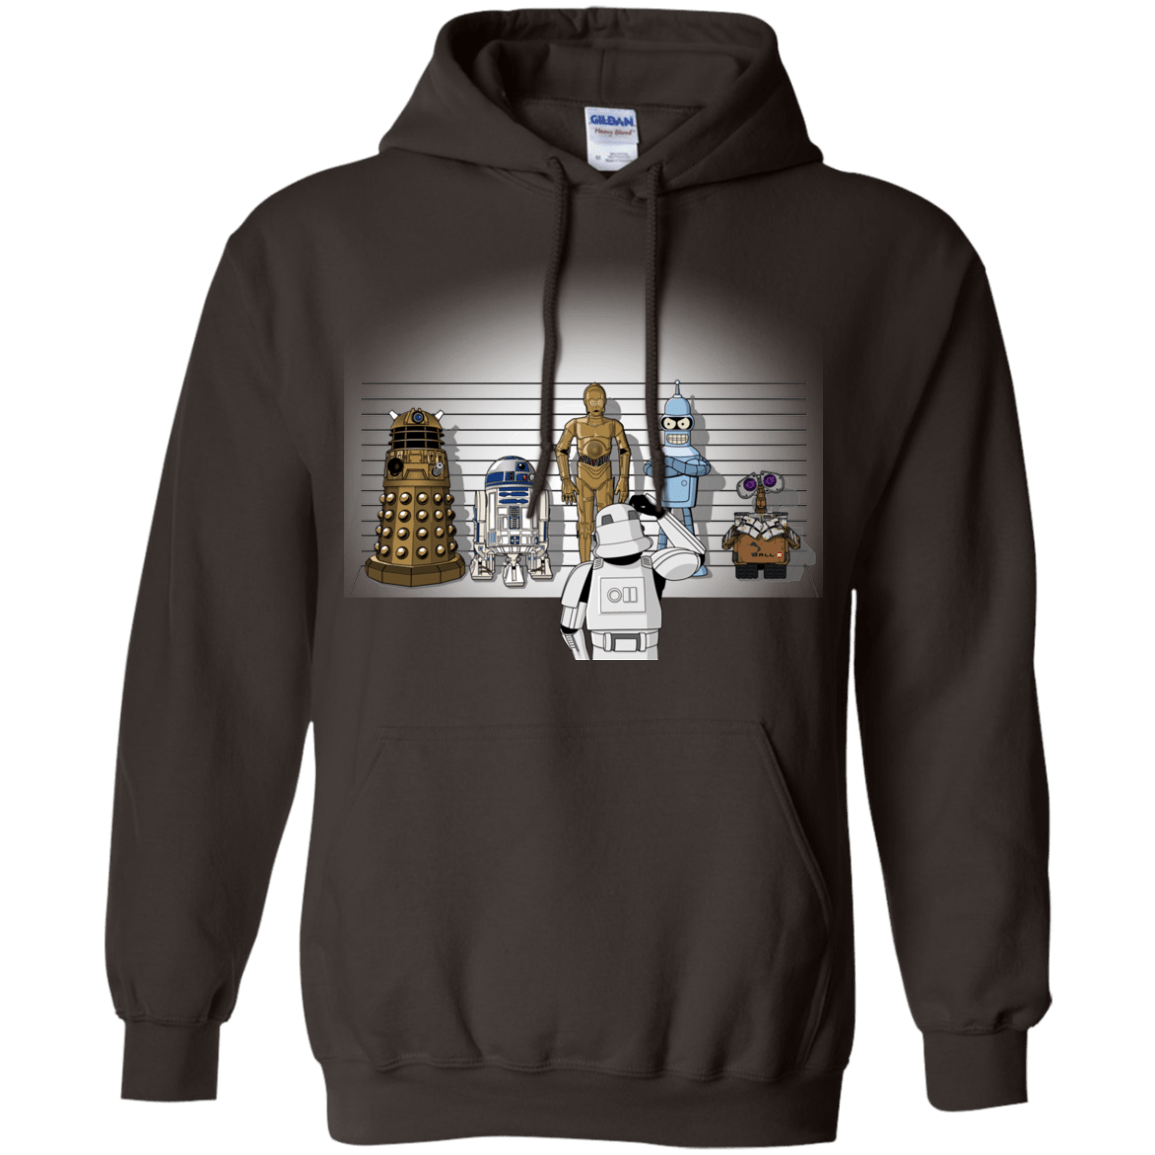 Sweatshirts Dark Chocolate / Small Are These Droids Pullover Hoodie